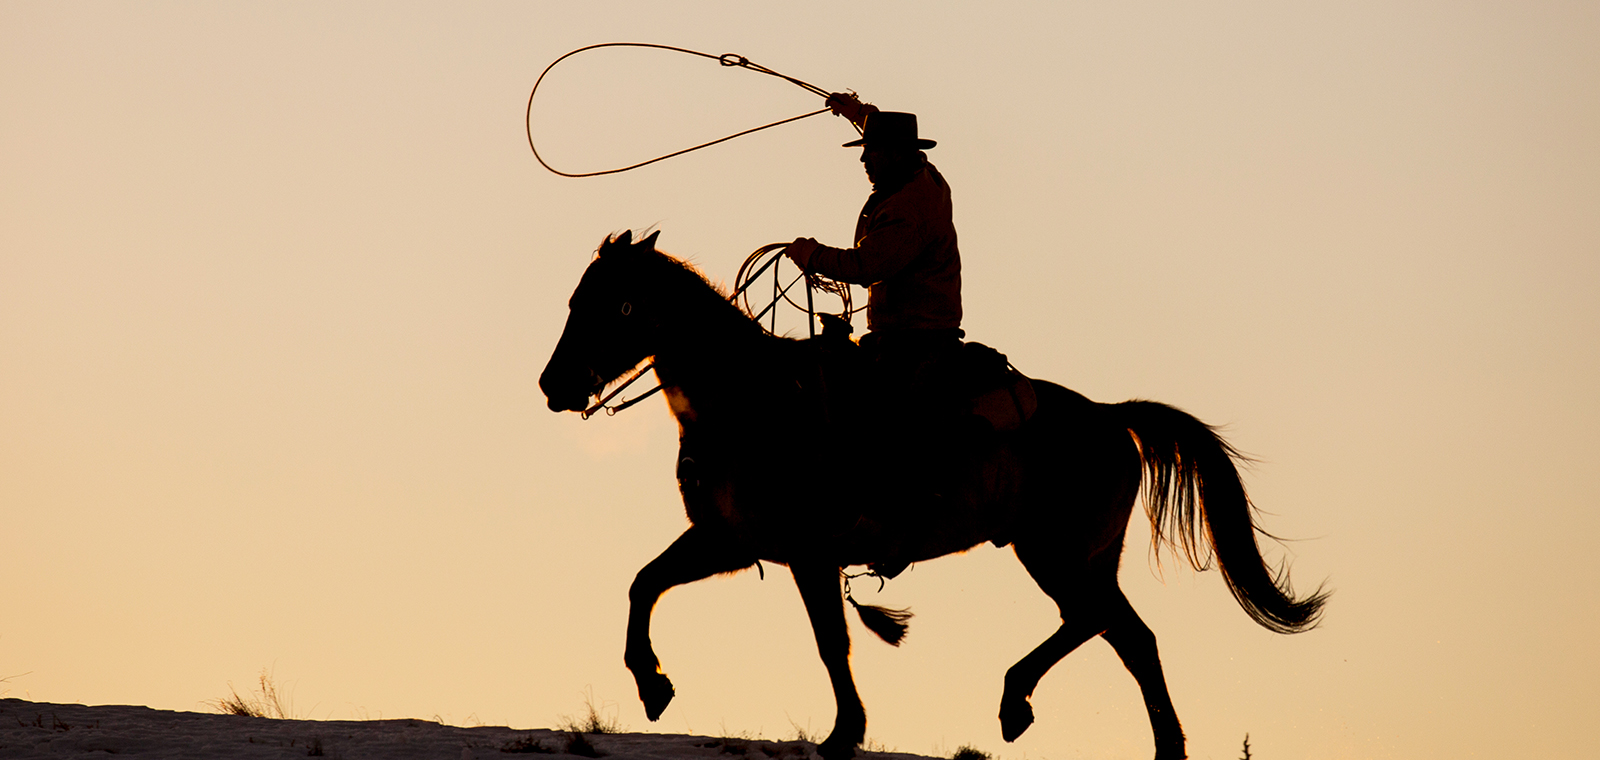 A lone western horseman is silhouetted by a setting sun as he swings a rope lasso overhead.  